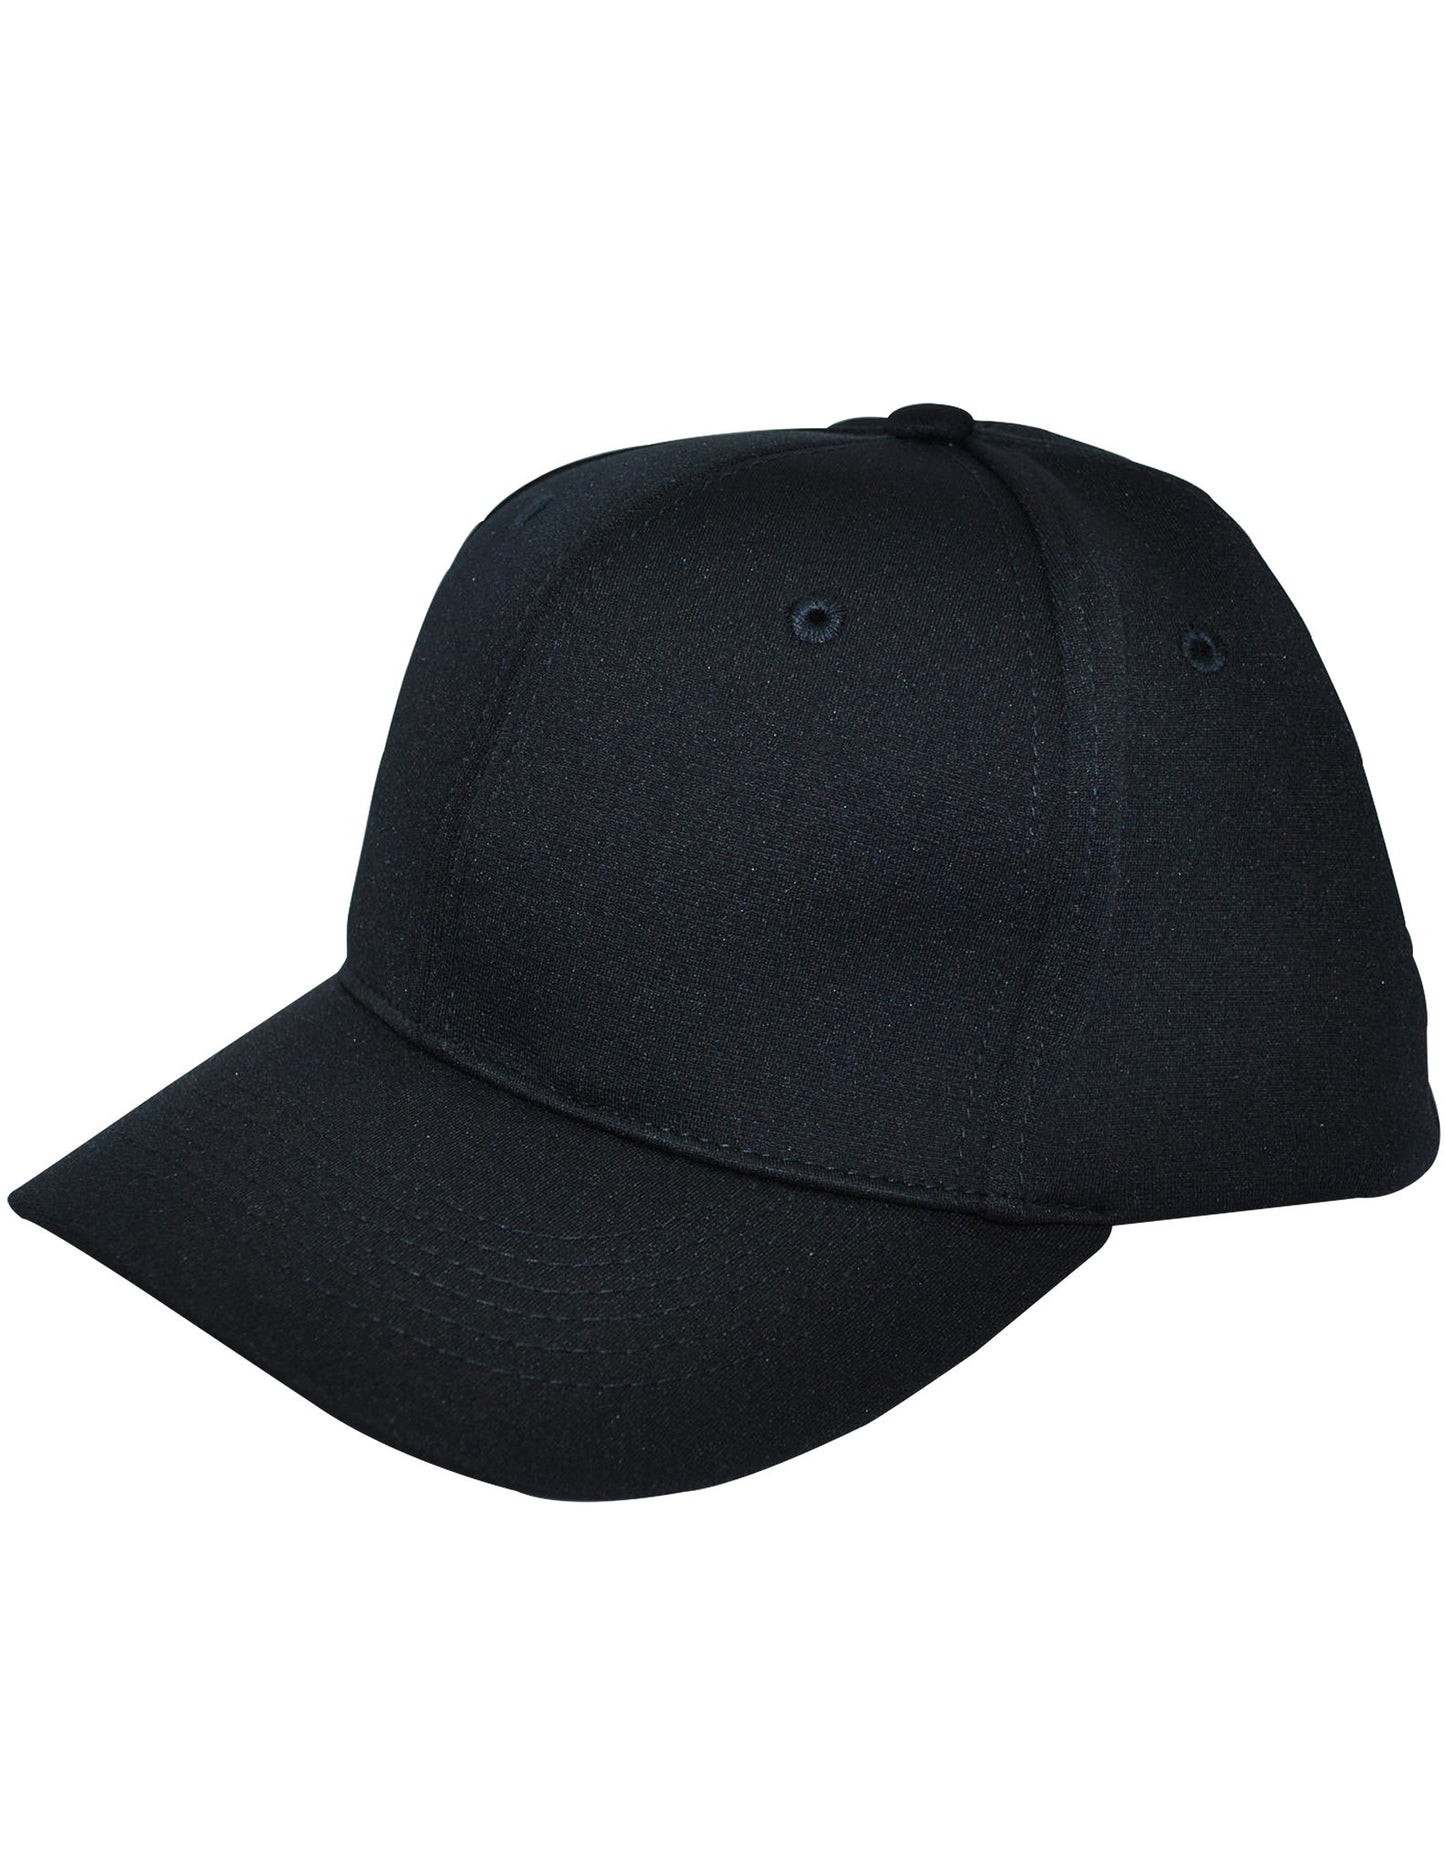 HT306 - Smitty - 6 Stitch Flex Fit Umpire (COMBO) Hat - Available in Black and Navy